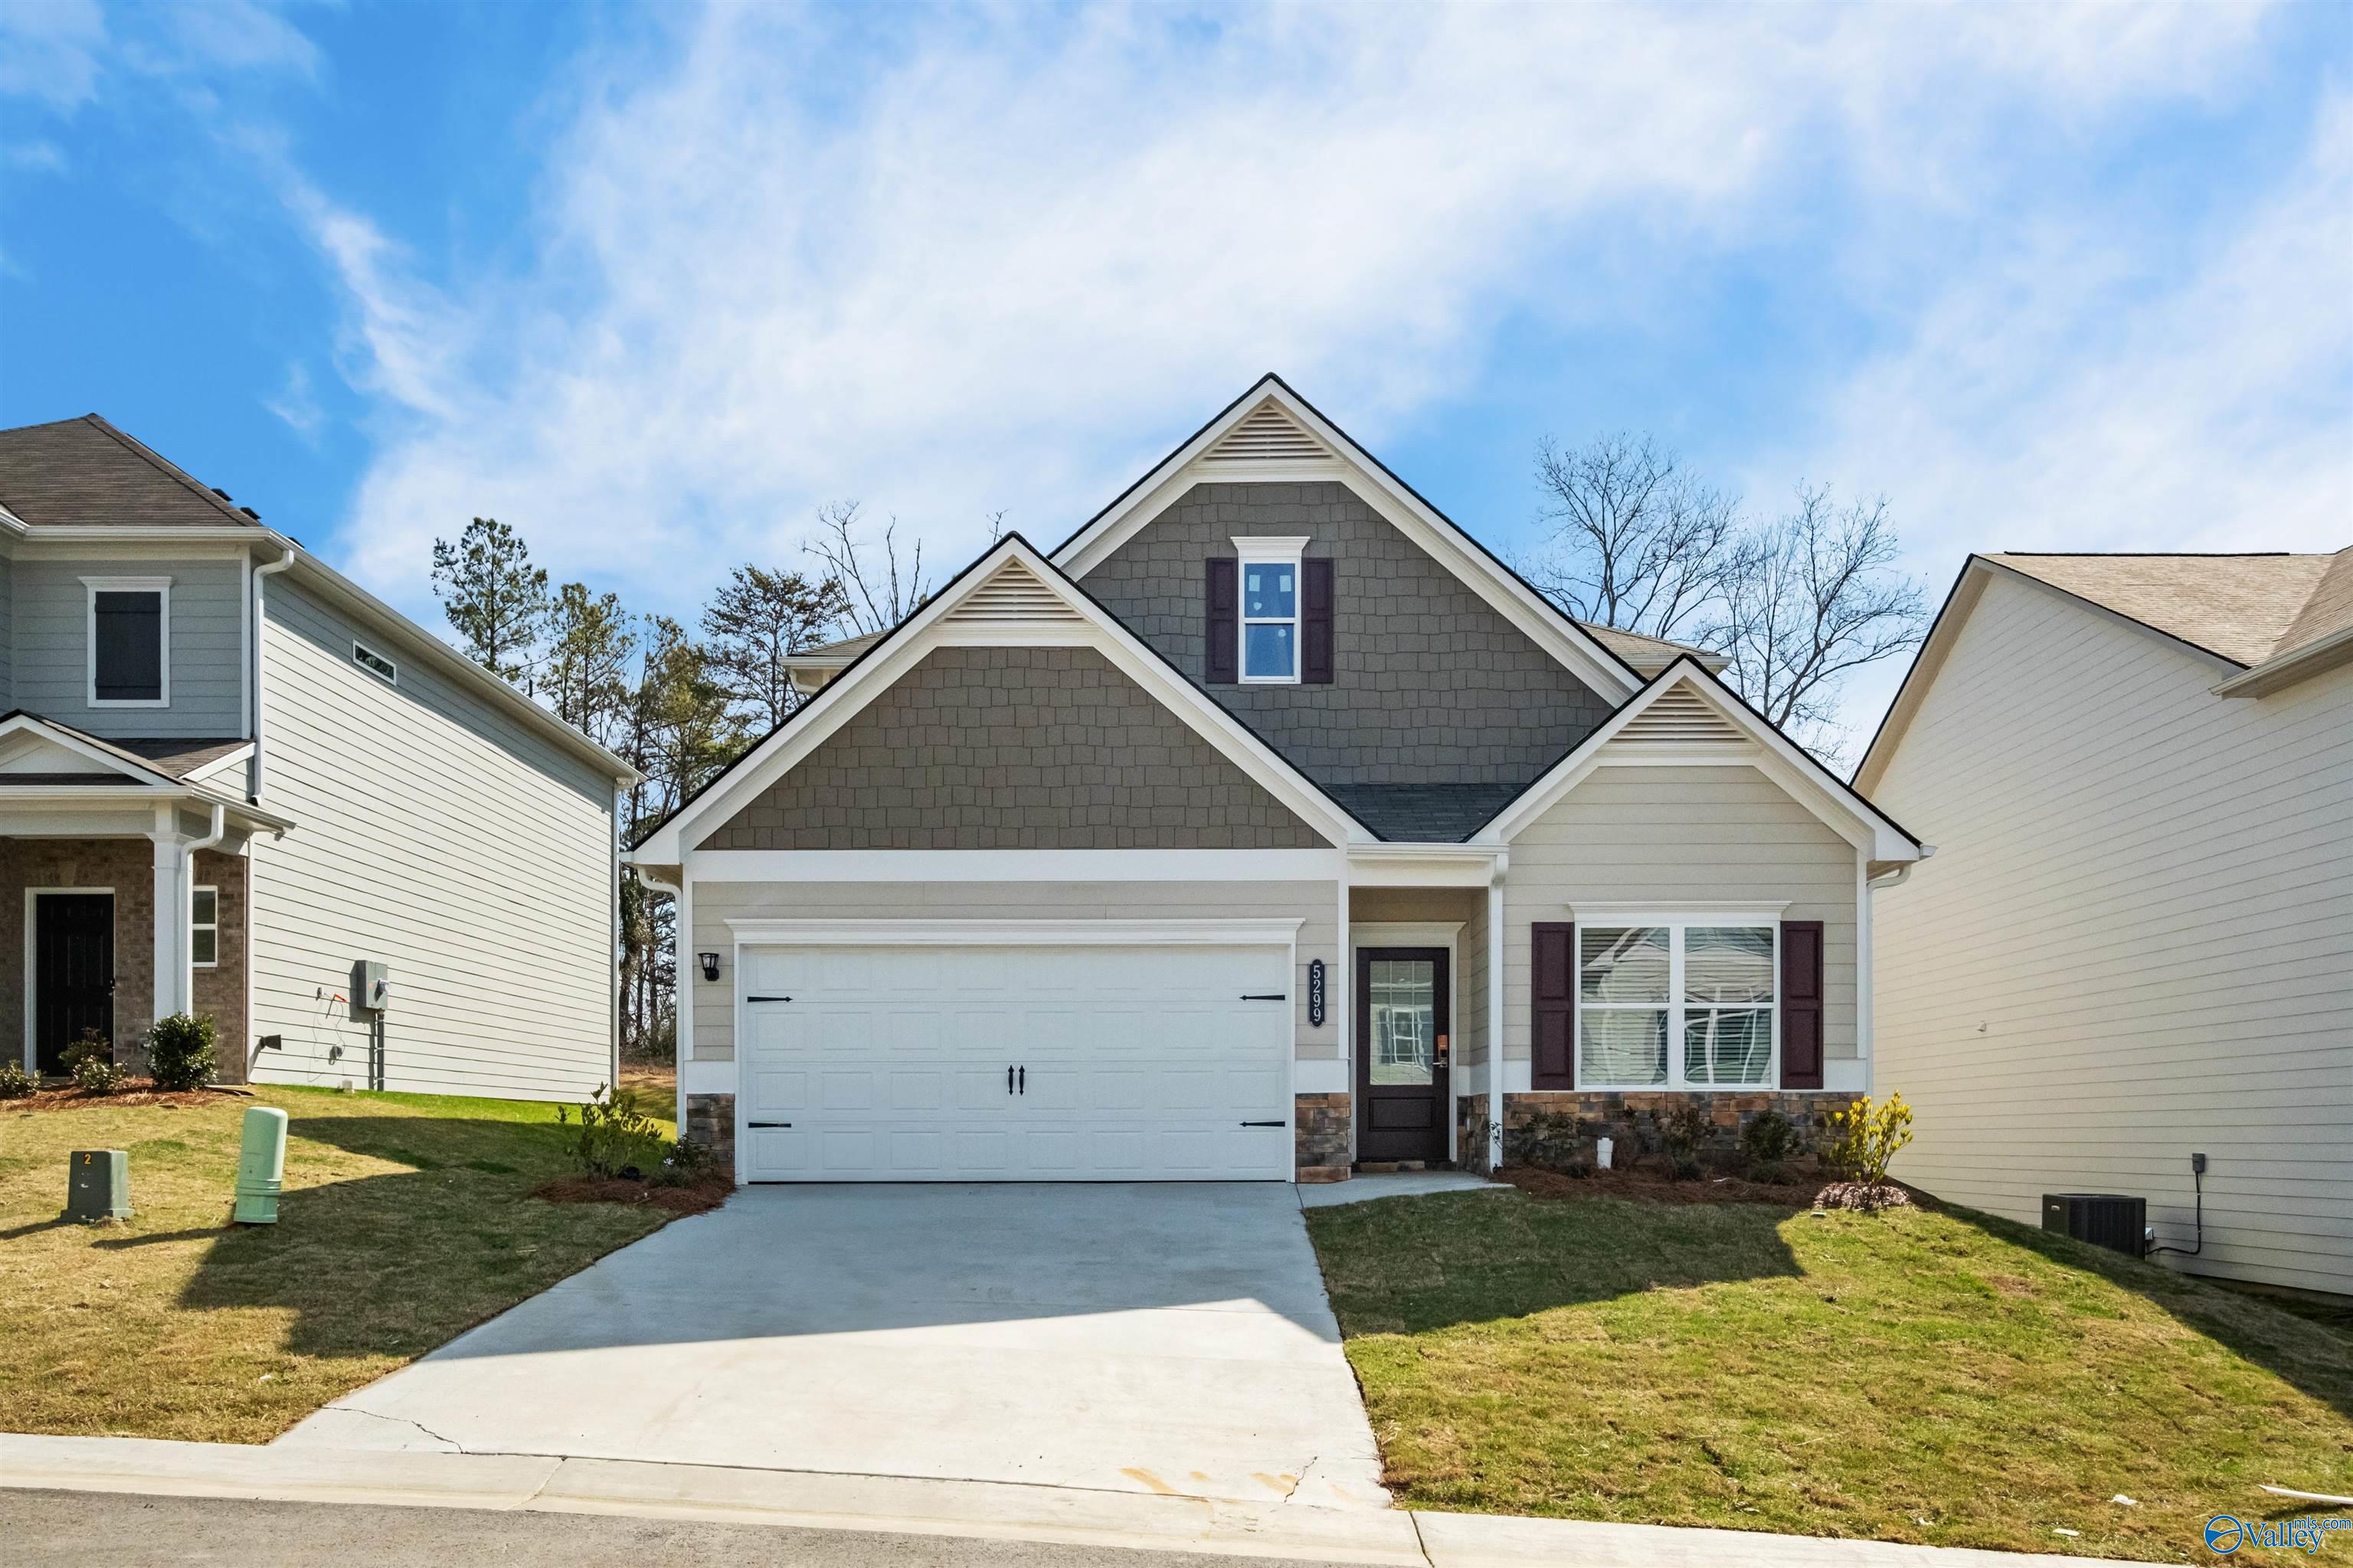 Property: The Caldwell Mill View Drive,New Market, AL